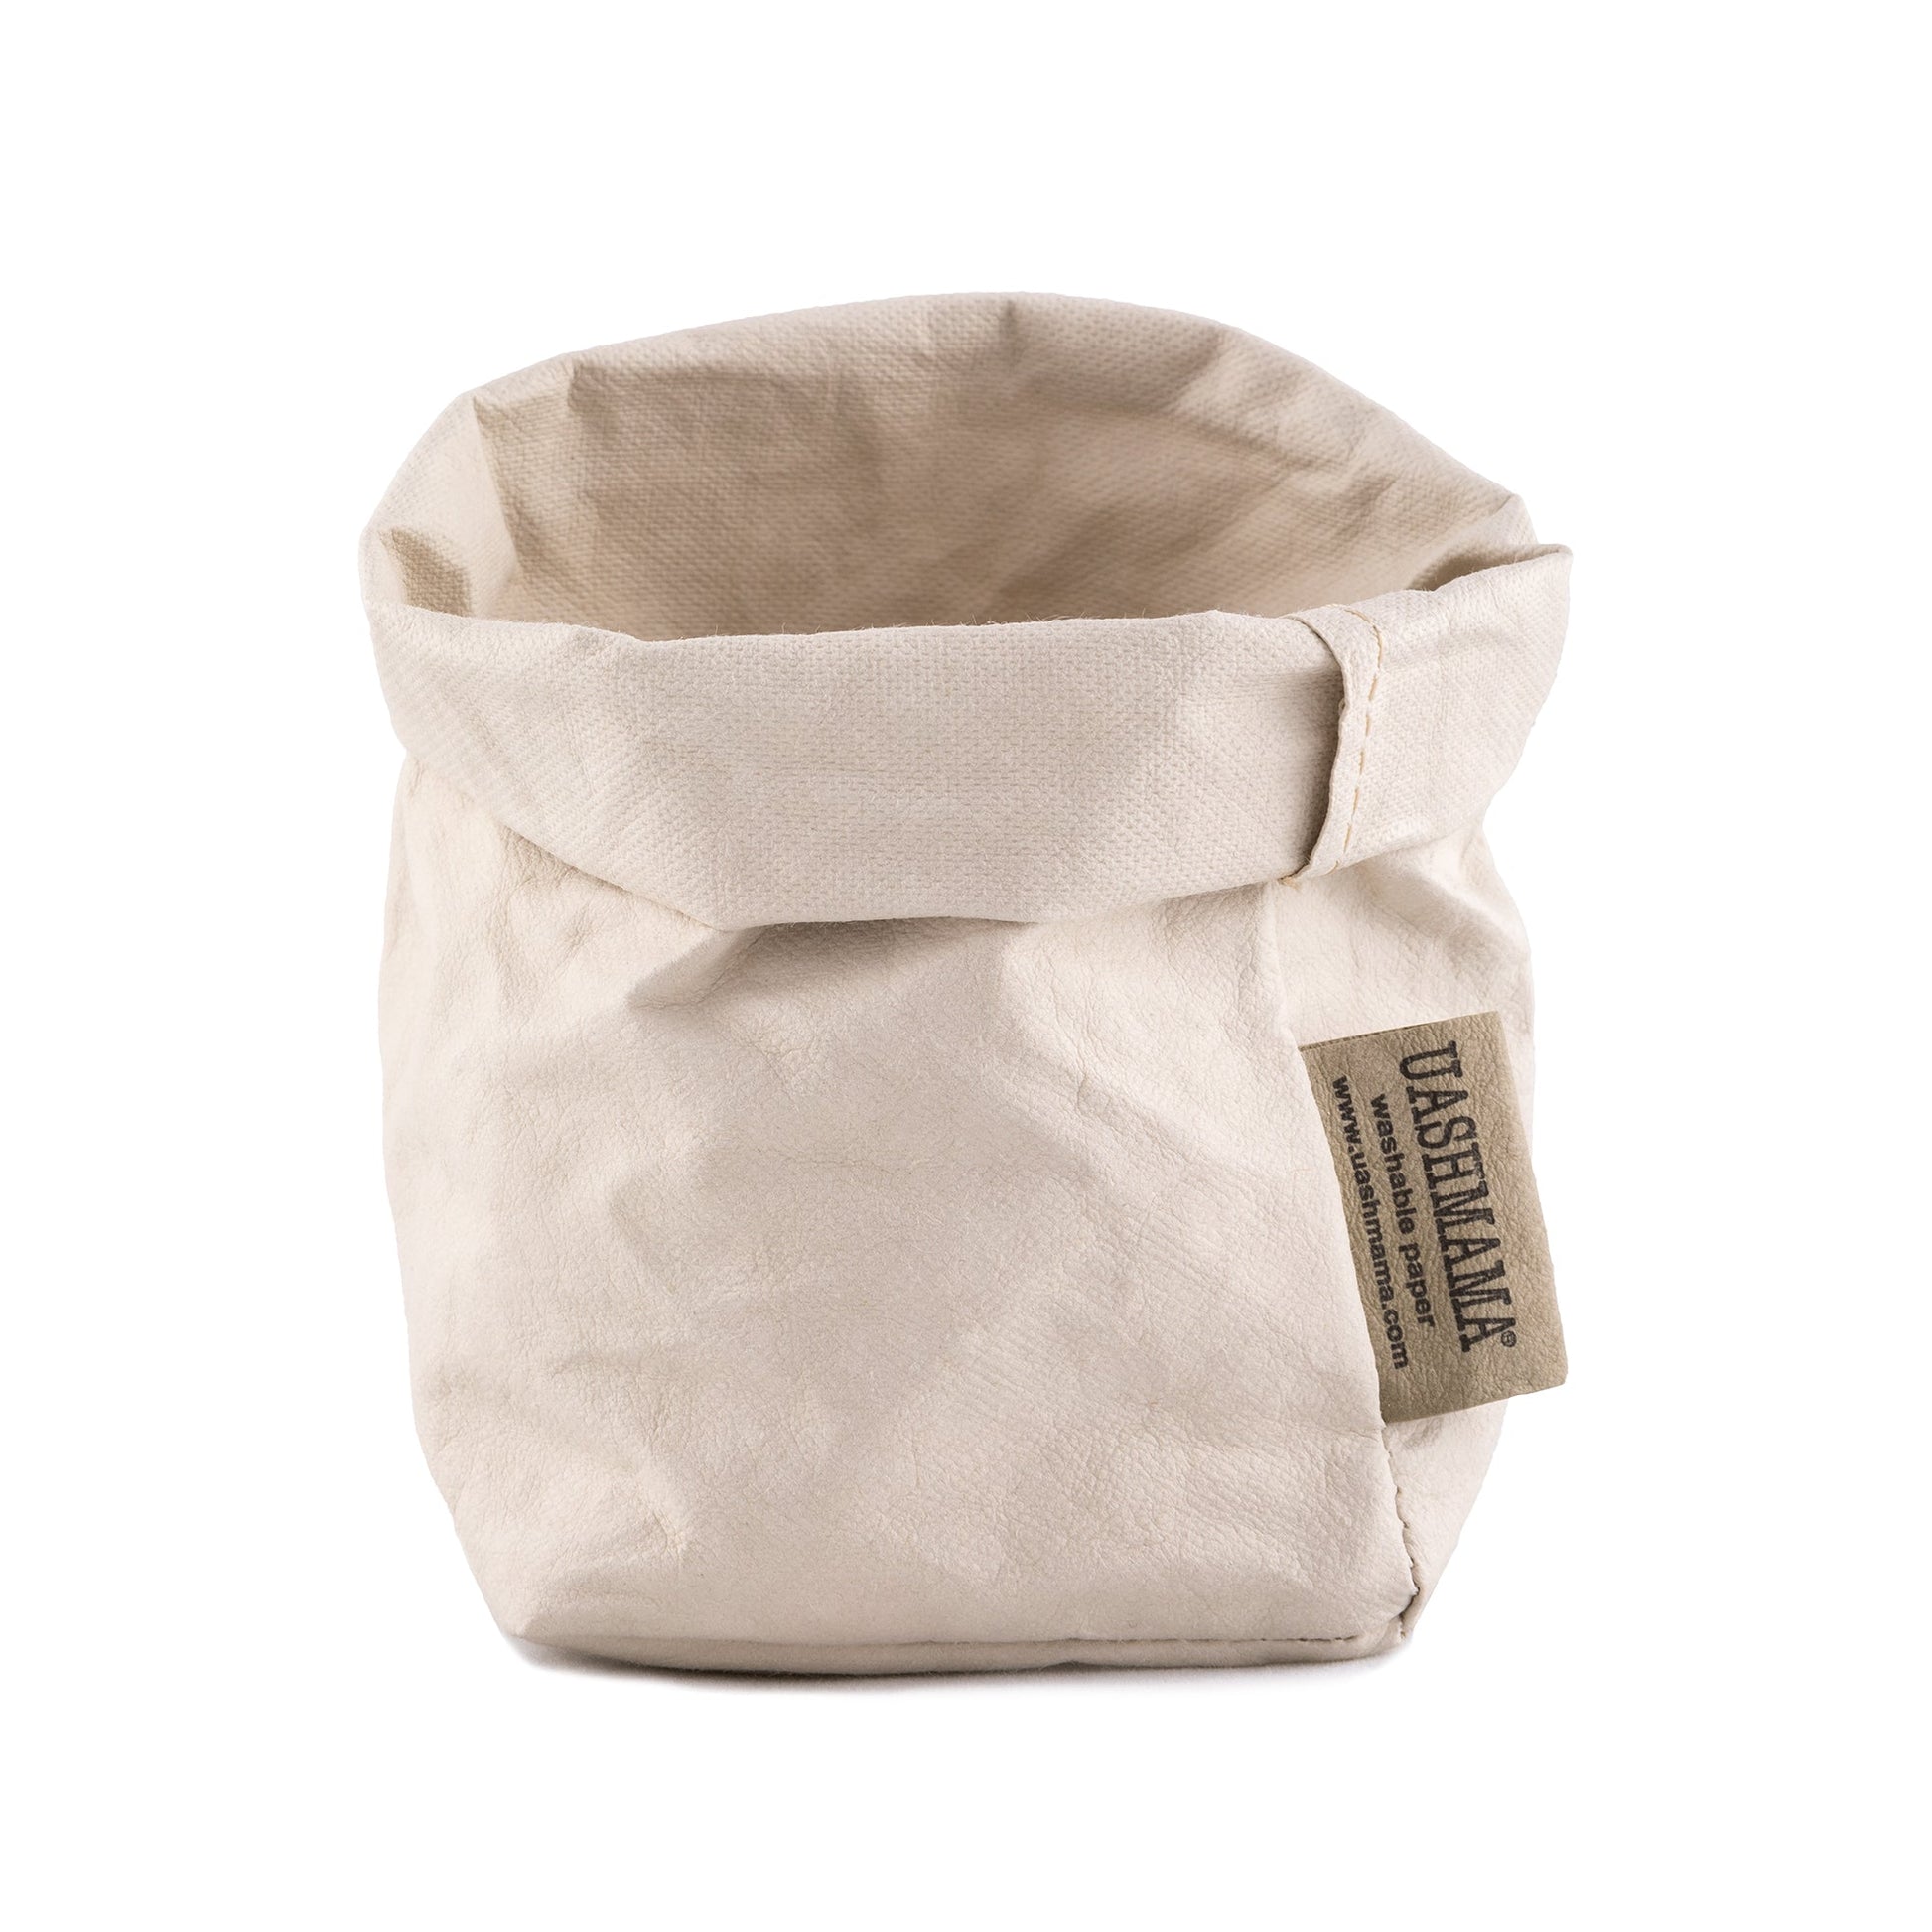 A washable paper bag is shown. The bag is rolled down at the top and features a UASHMAMA logo label on the bottom left corner. The bag pictured is the piccolo size in cream.